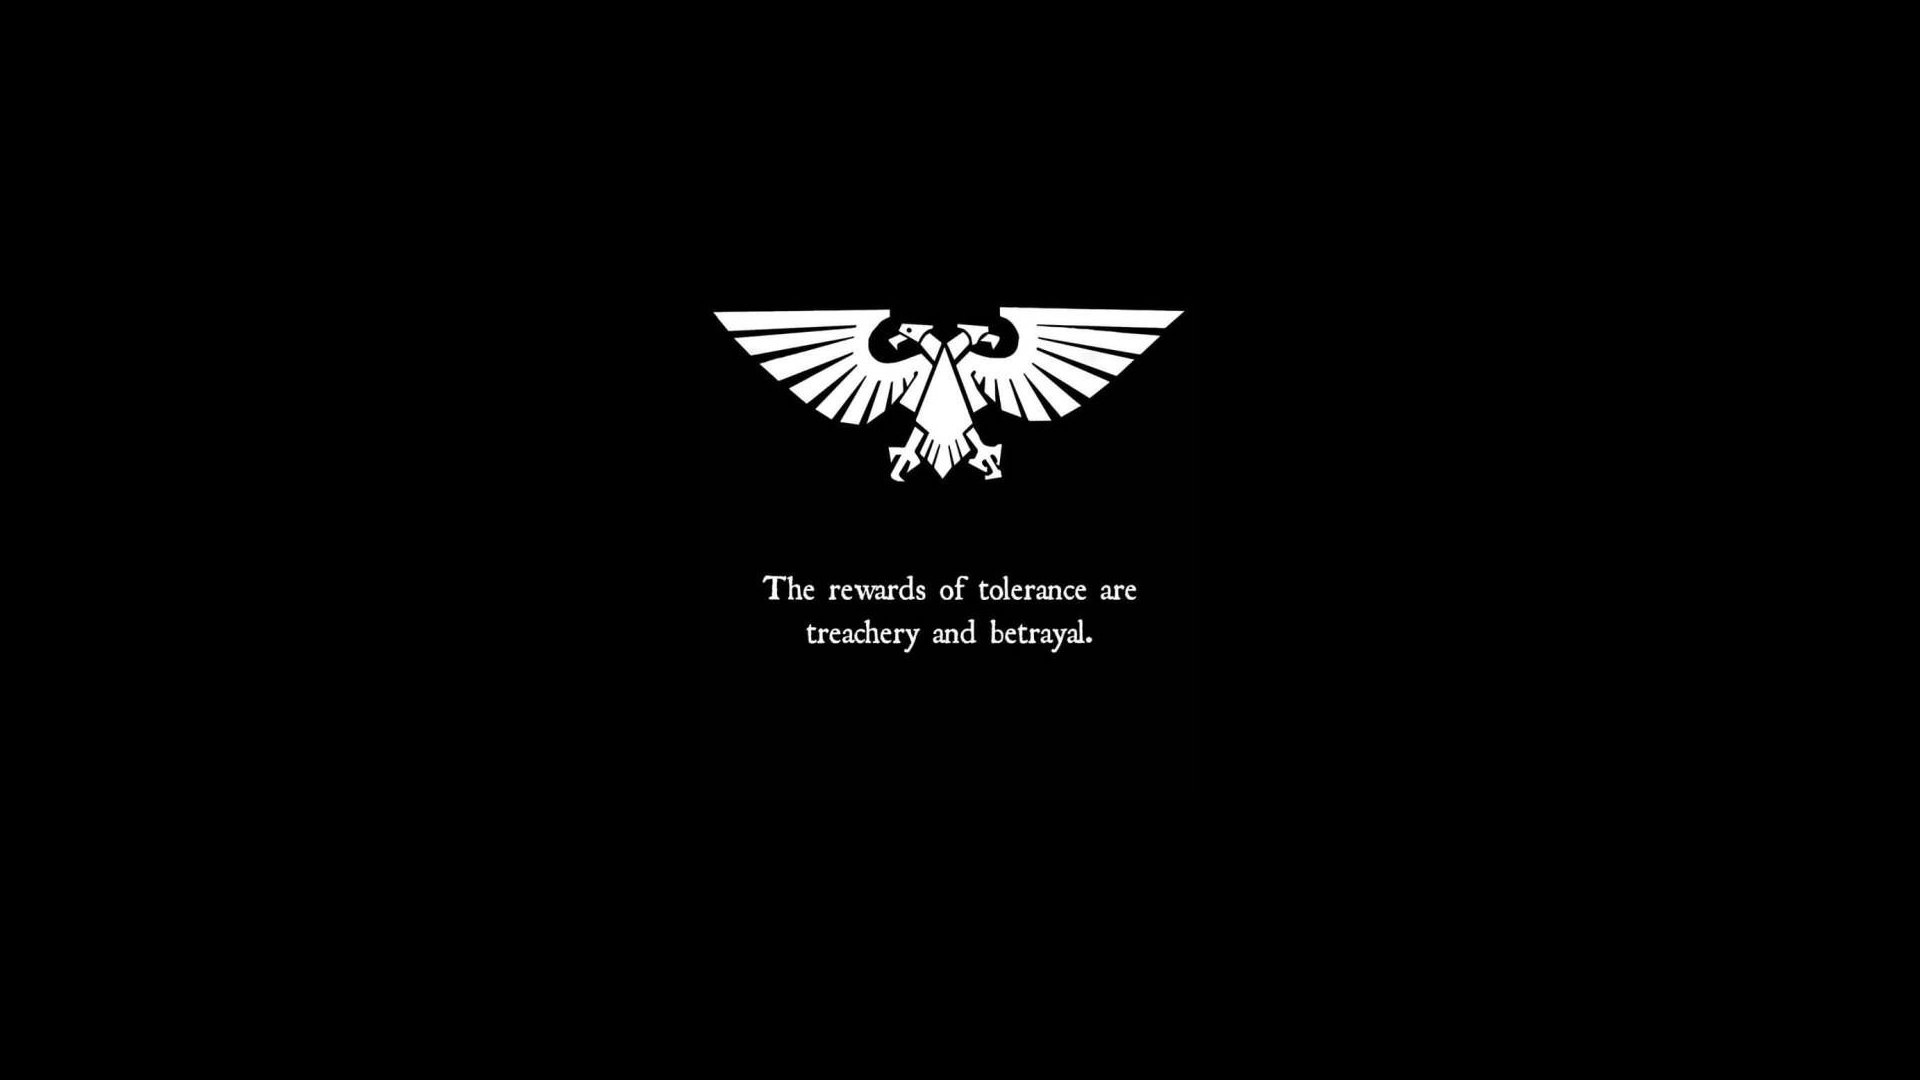 General 1920x1080 Warhammer 40,000 Warhammer Imperium of Man imperial guard black background text simple background quote